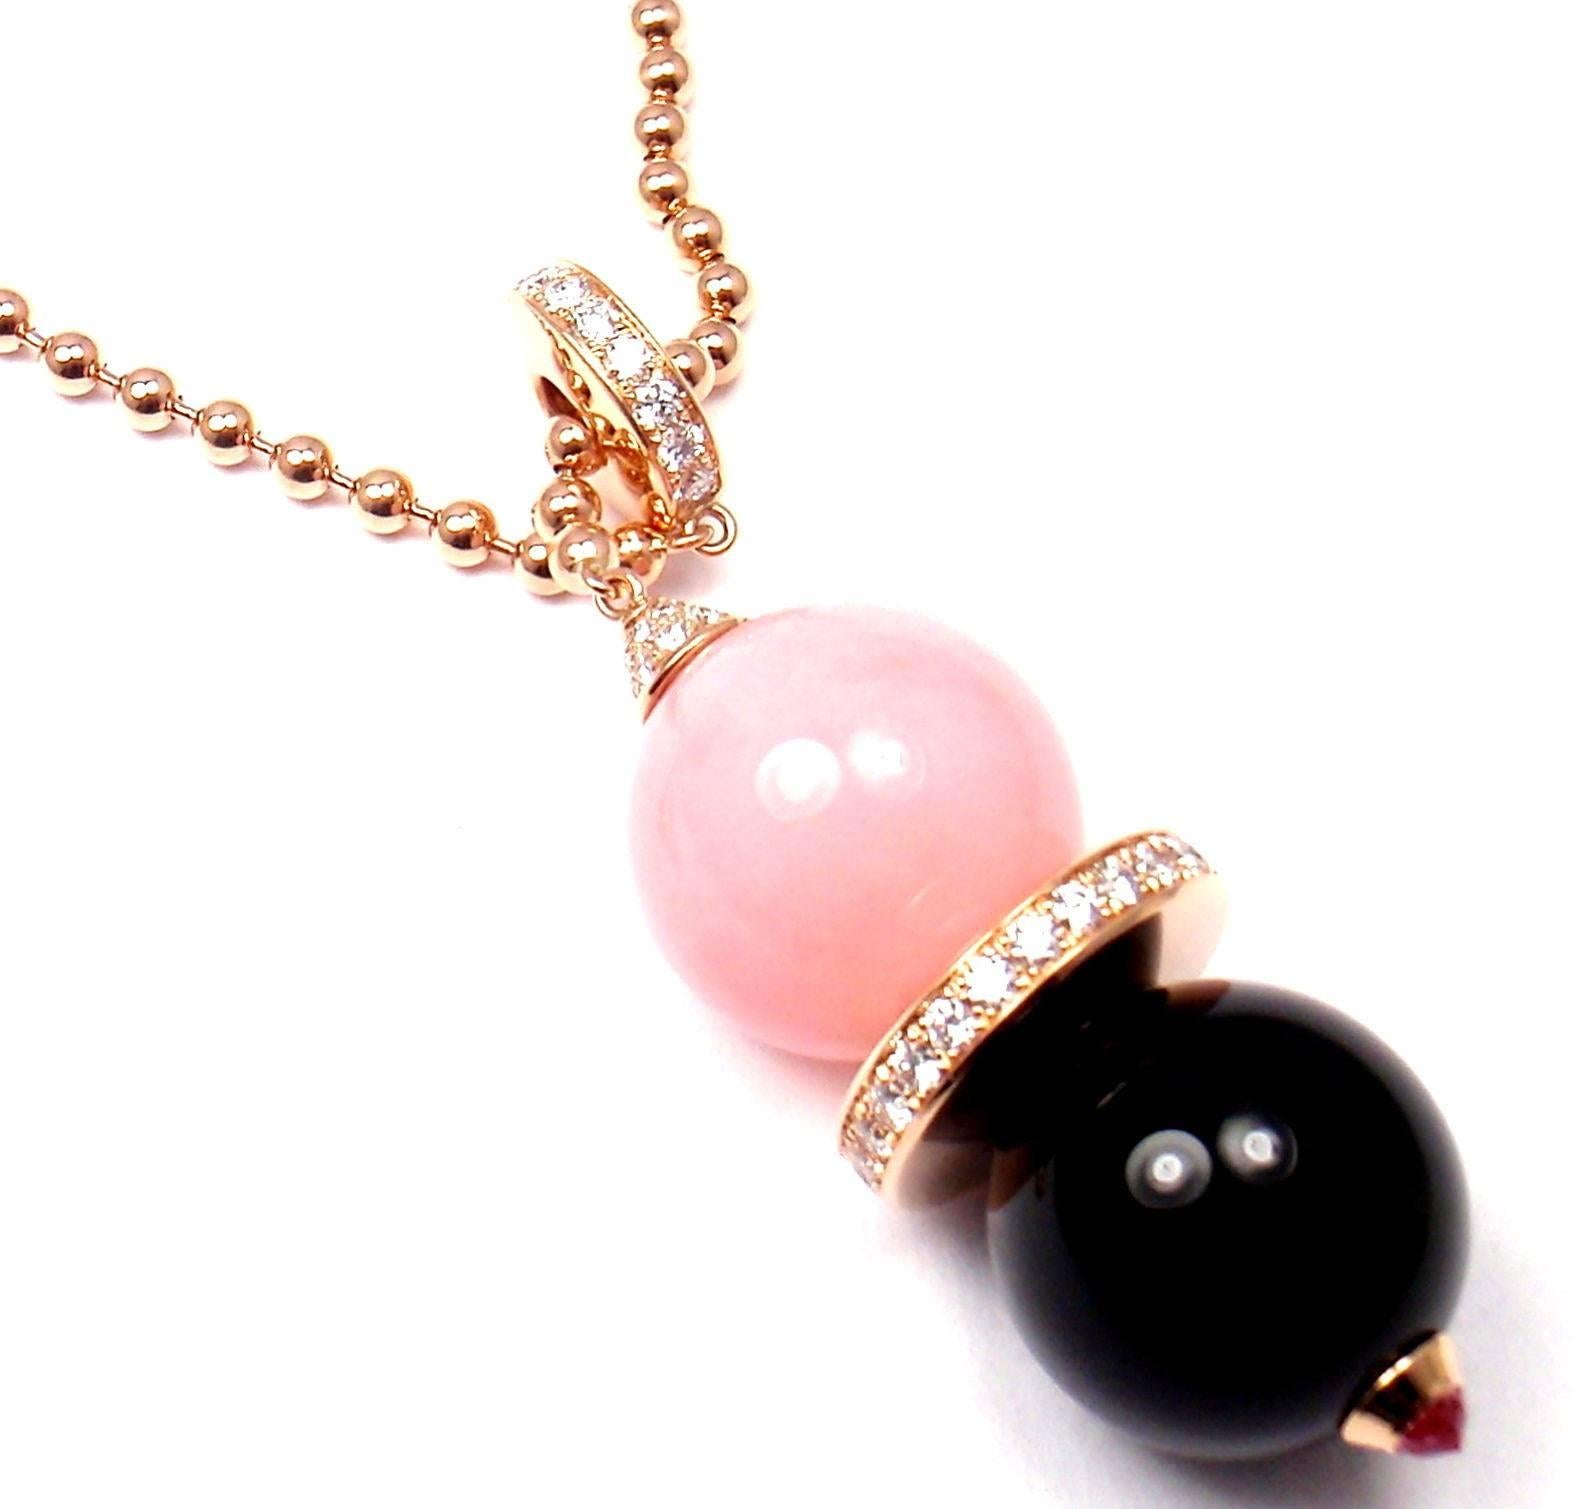 18k Rose Gold Diamond Pink Opal Black Onyx And Pink Sapphire Évasions Joaillières Larial Necklace by Cartier.
With 56 round brilliant cut diamonds VVS1 clarity,
E color
1 large 16mm onyx bead
1 large 16mm pink opal bead
1 pink sapphire 
This